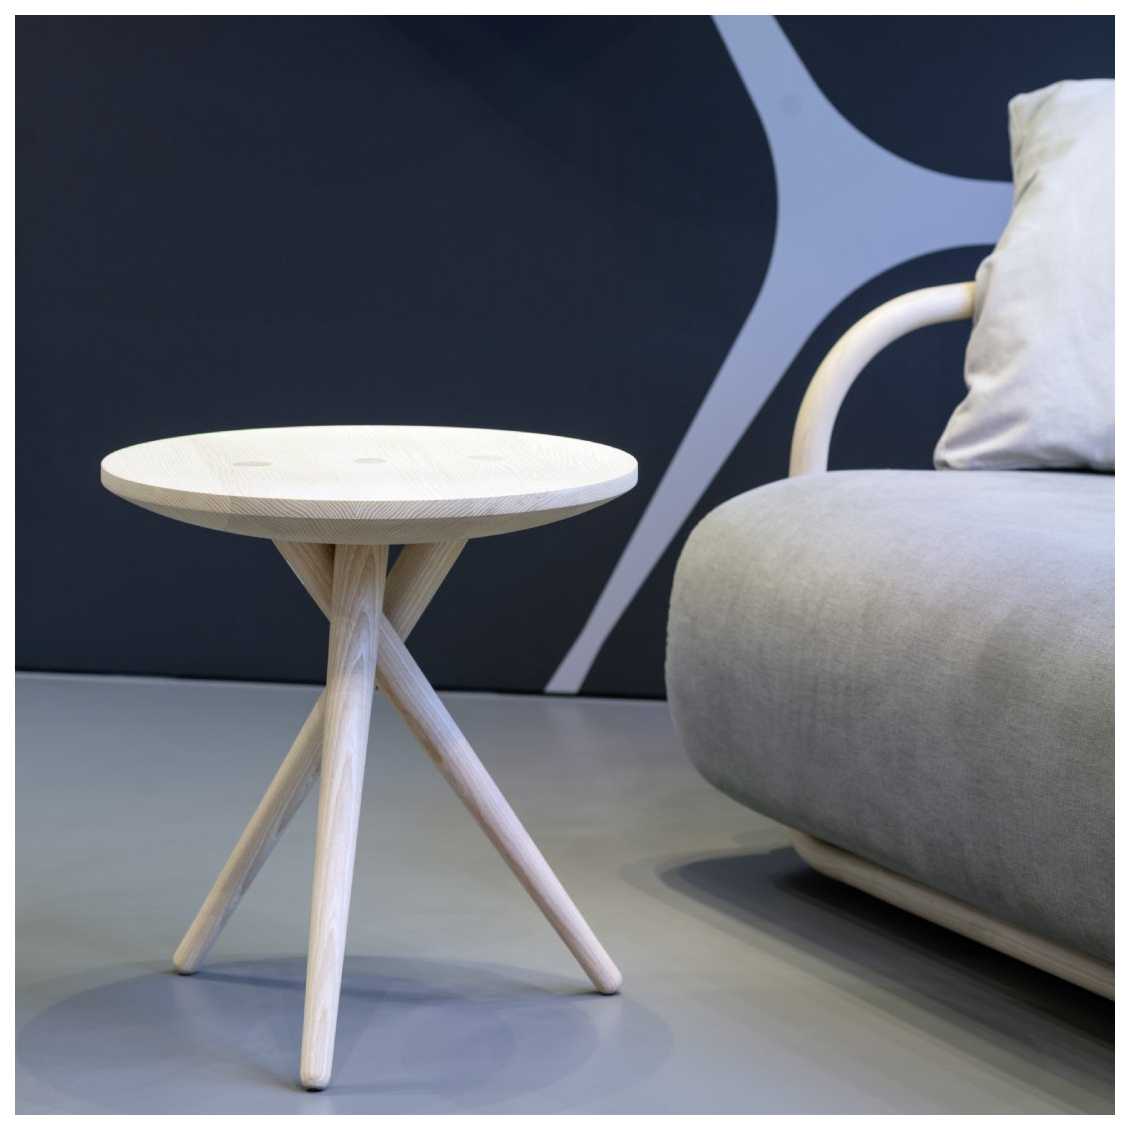 THONET 1025 side table